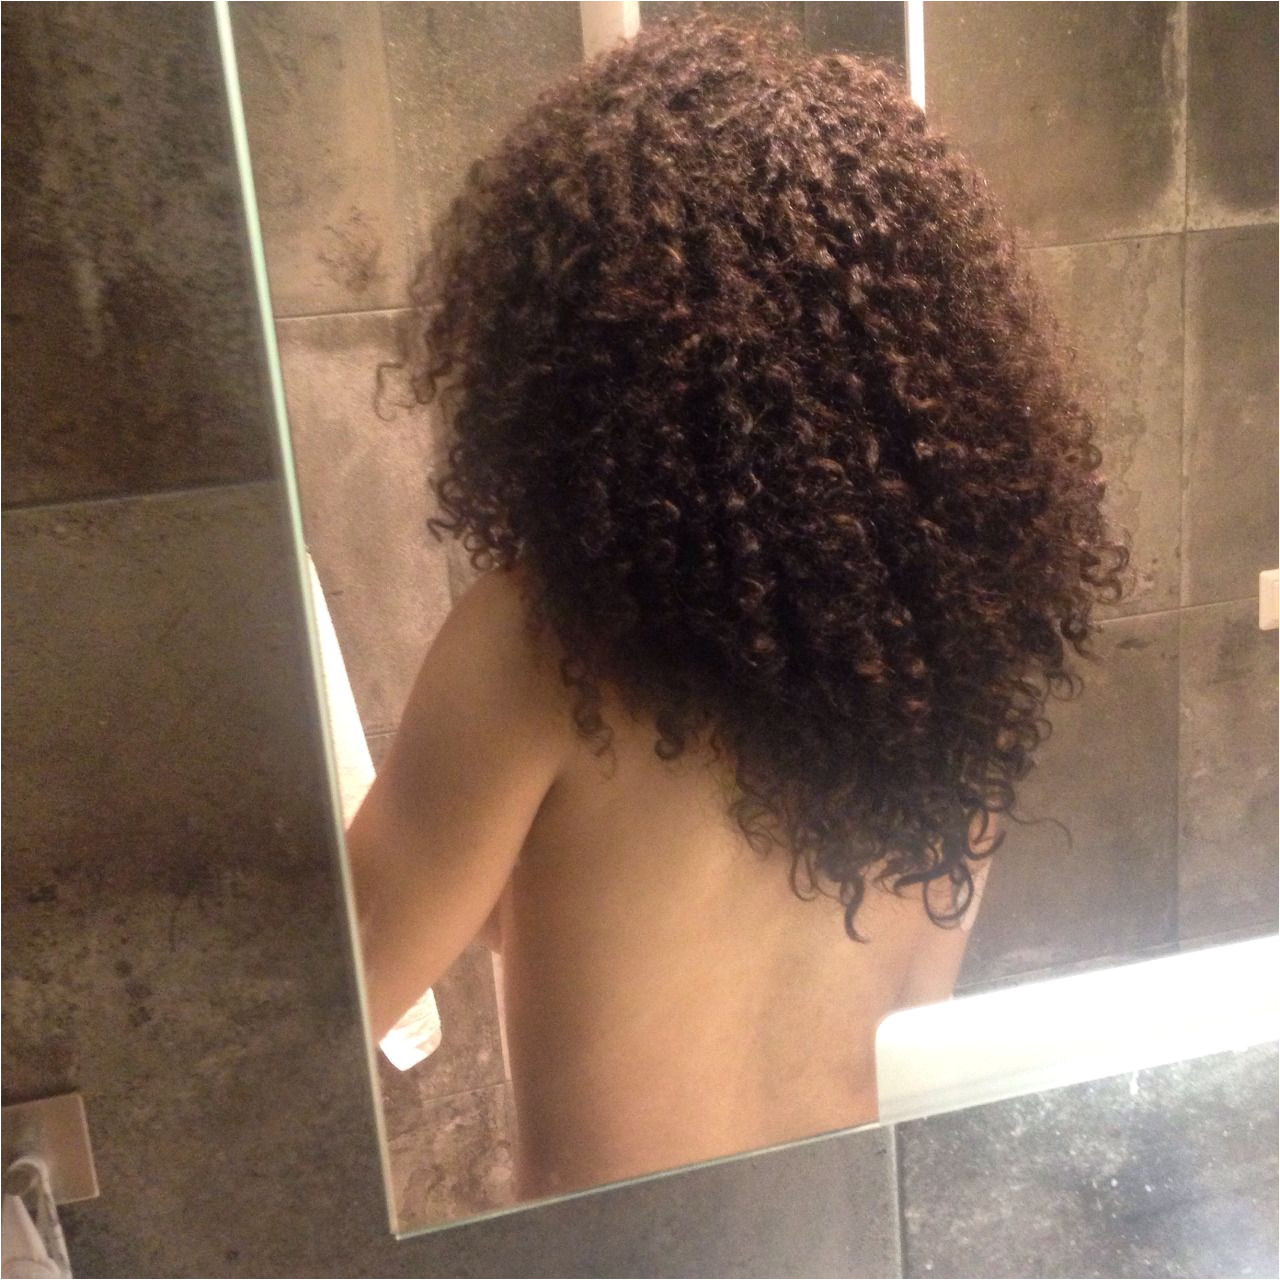 6joy “This is what 2 and a half years natural looks like for someone with 3b 3c hair ”